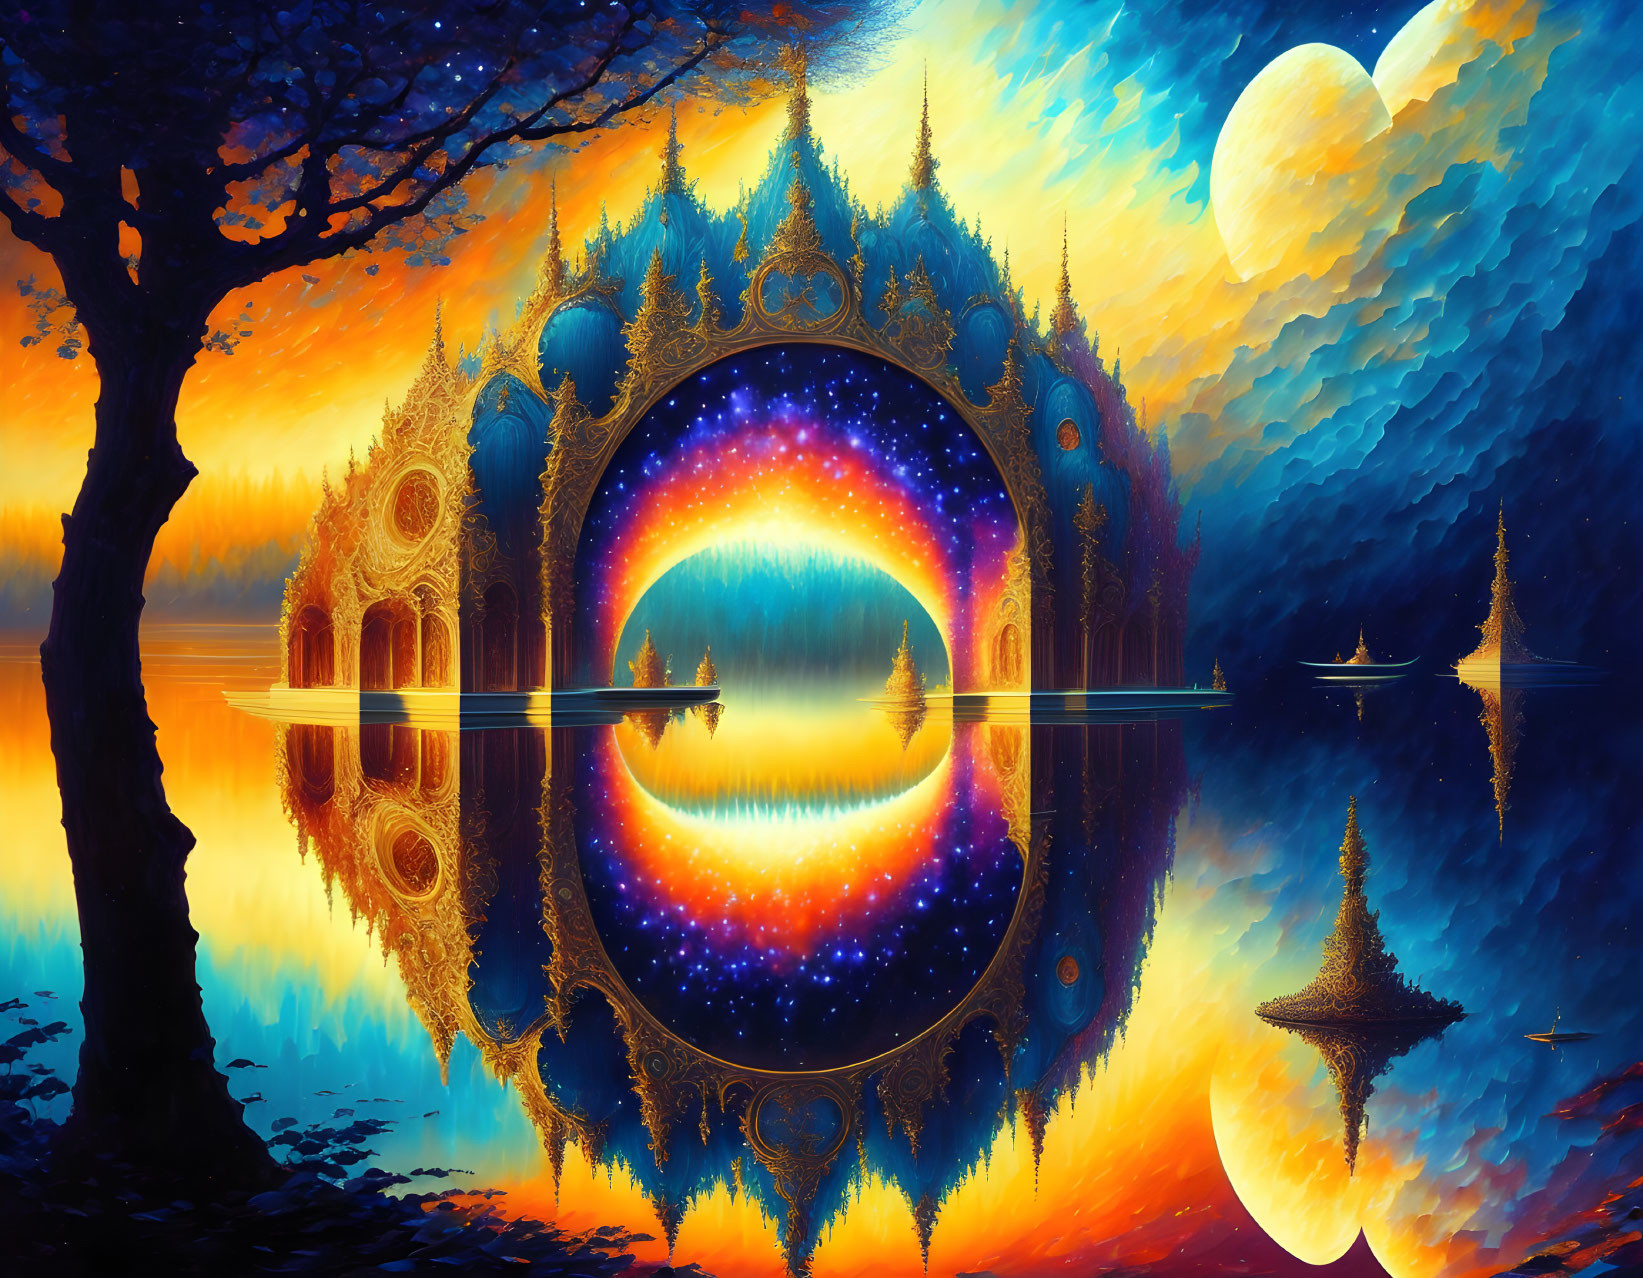 Surreal landscape with cosmic portal, lake, ornate structures, dual-toned sky, two